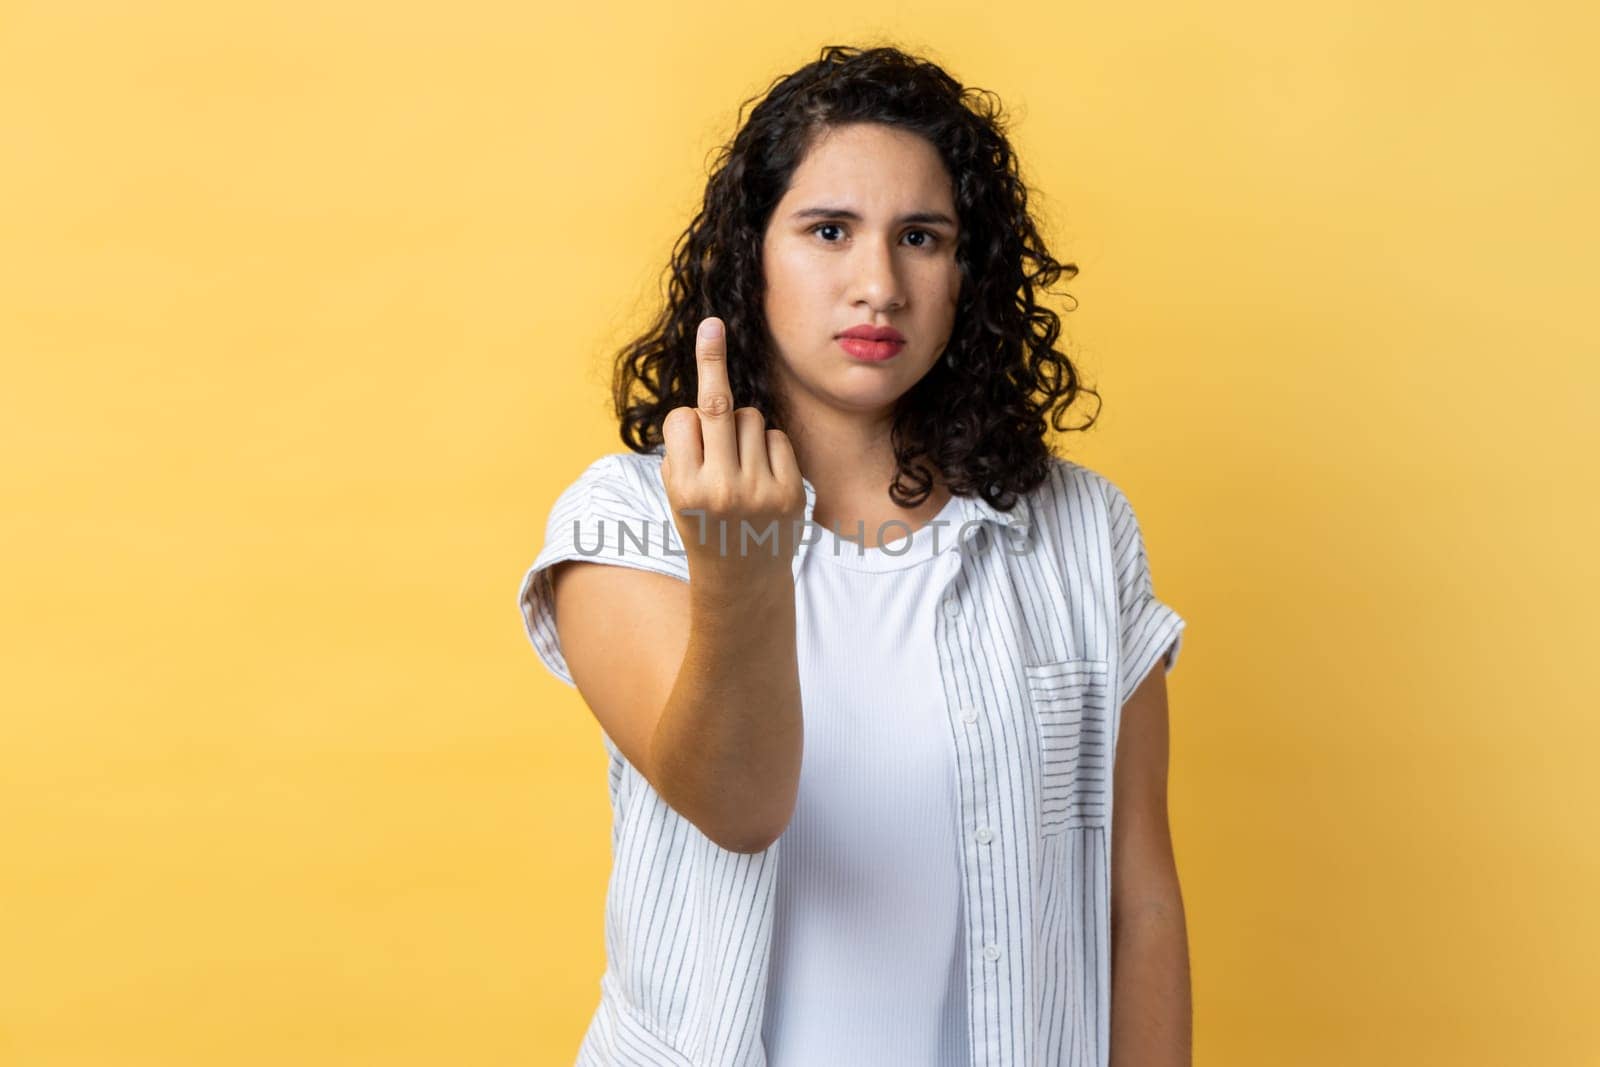 Portrait of woman with dark wavy hair showing middle finger and asking to get off looking at camera with negativity, disrespectful behaviour. Indoor studio shot isolated on yellow background.